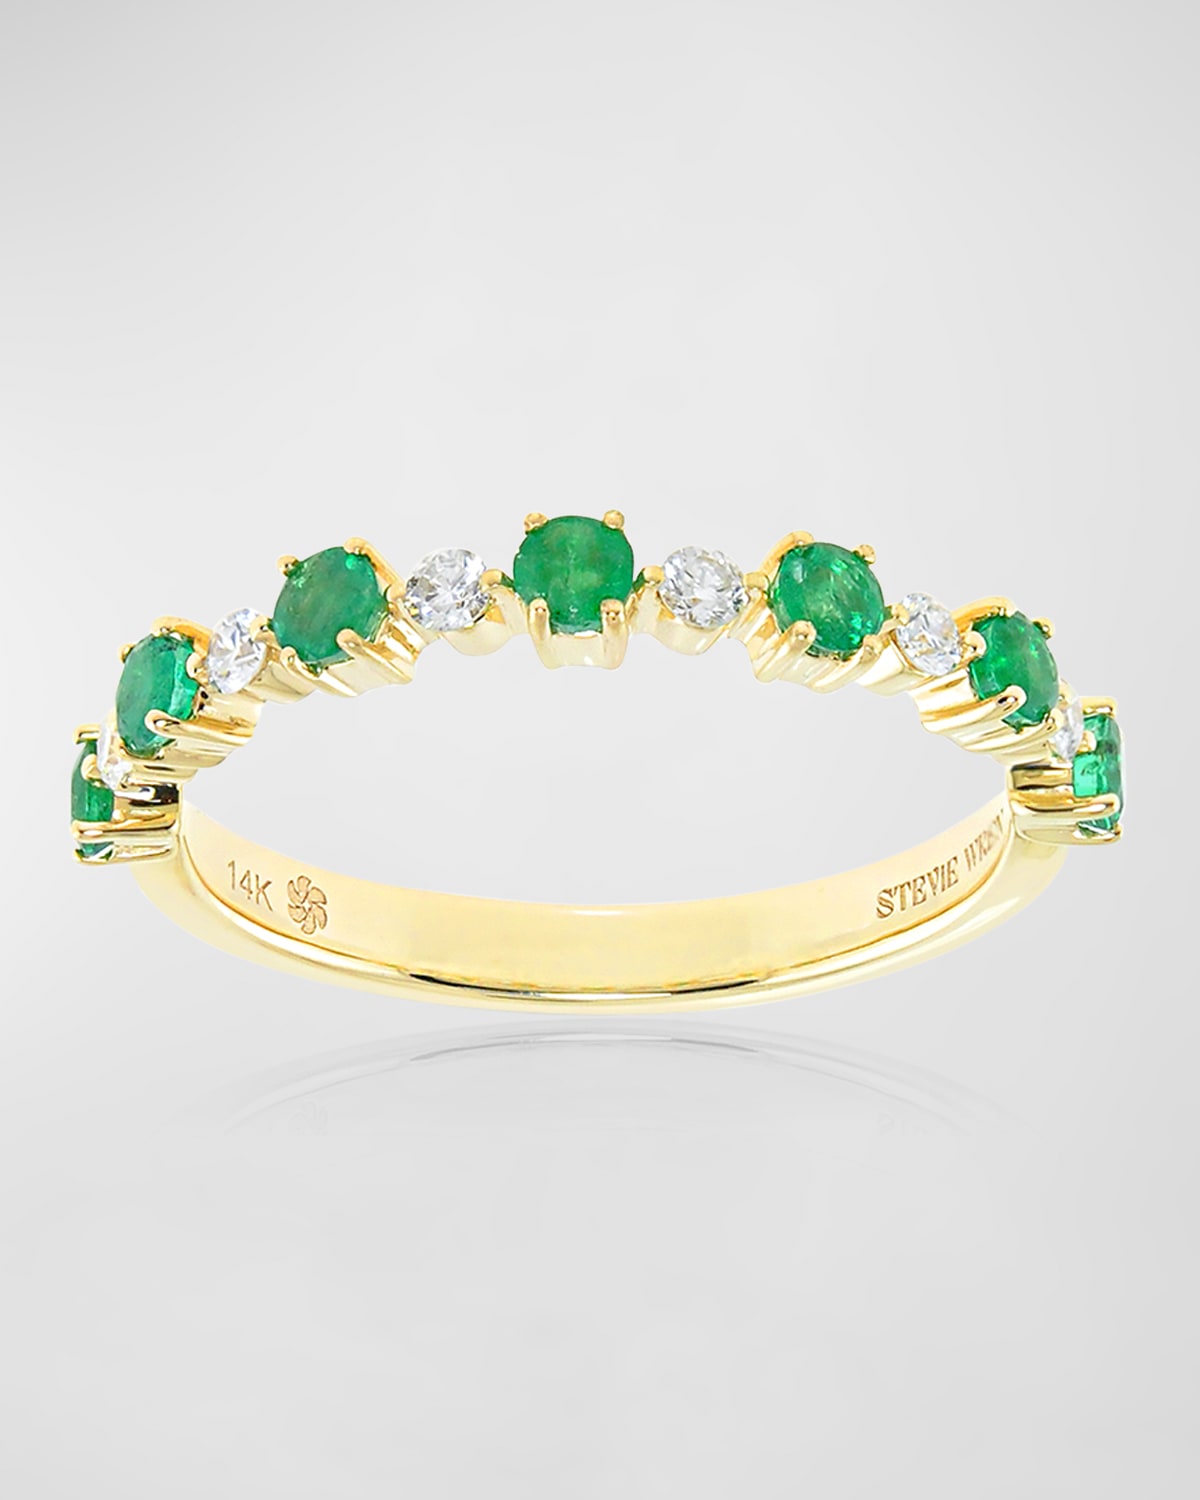 14k Gold Flowerette Diamond and Emerald Stack Ring